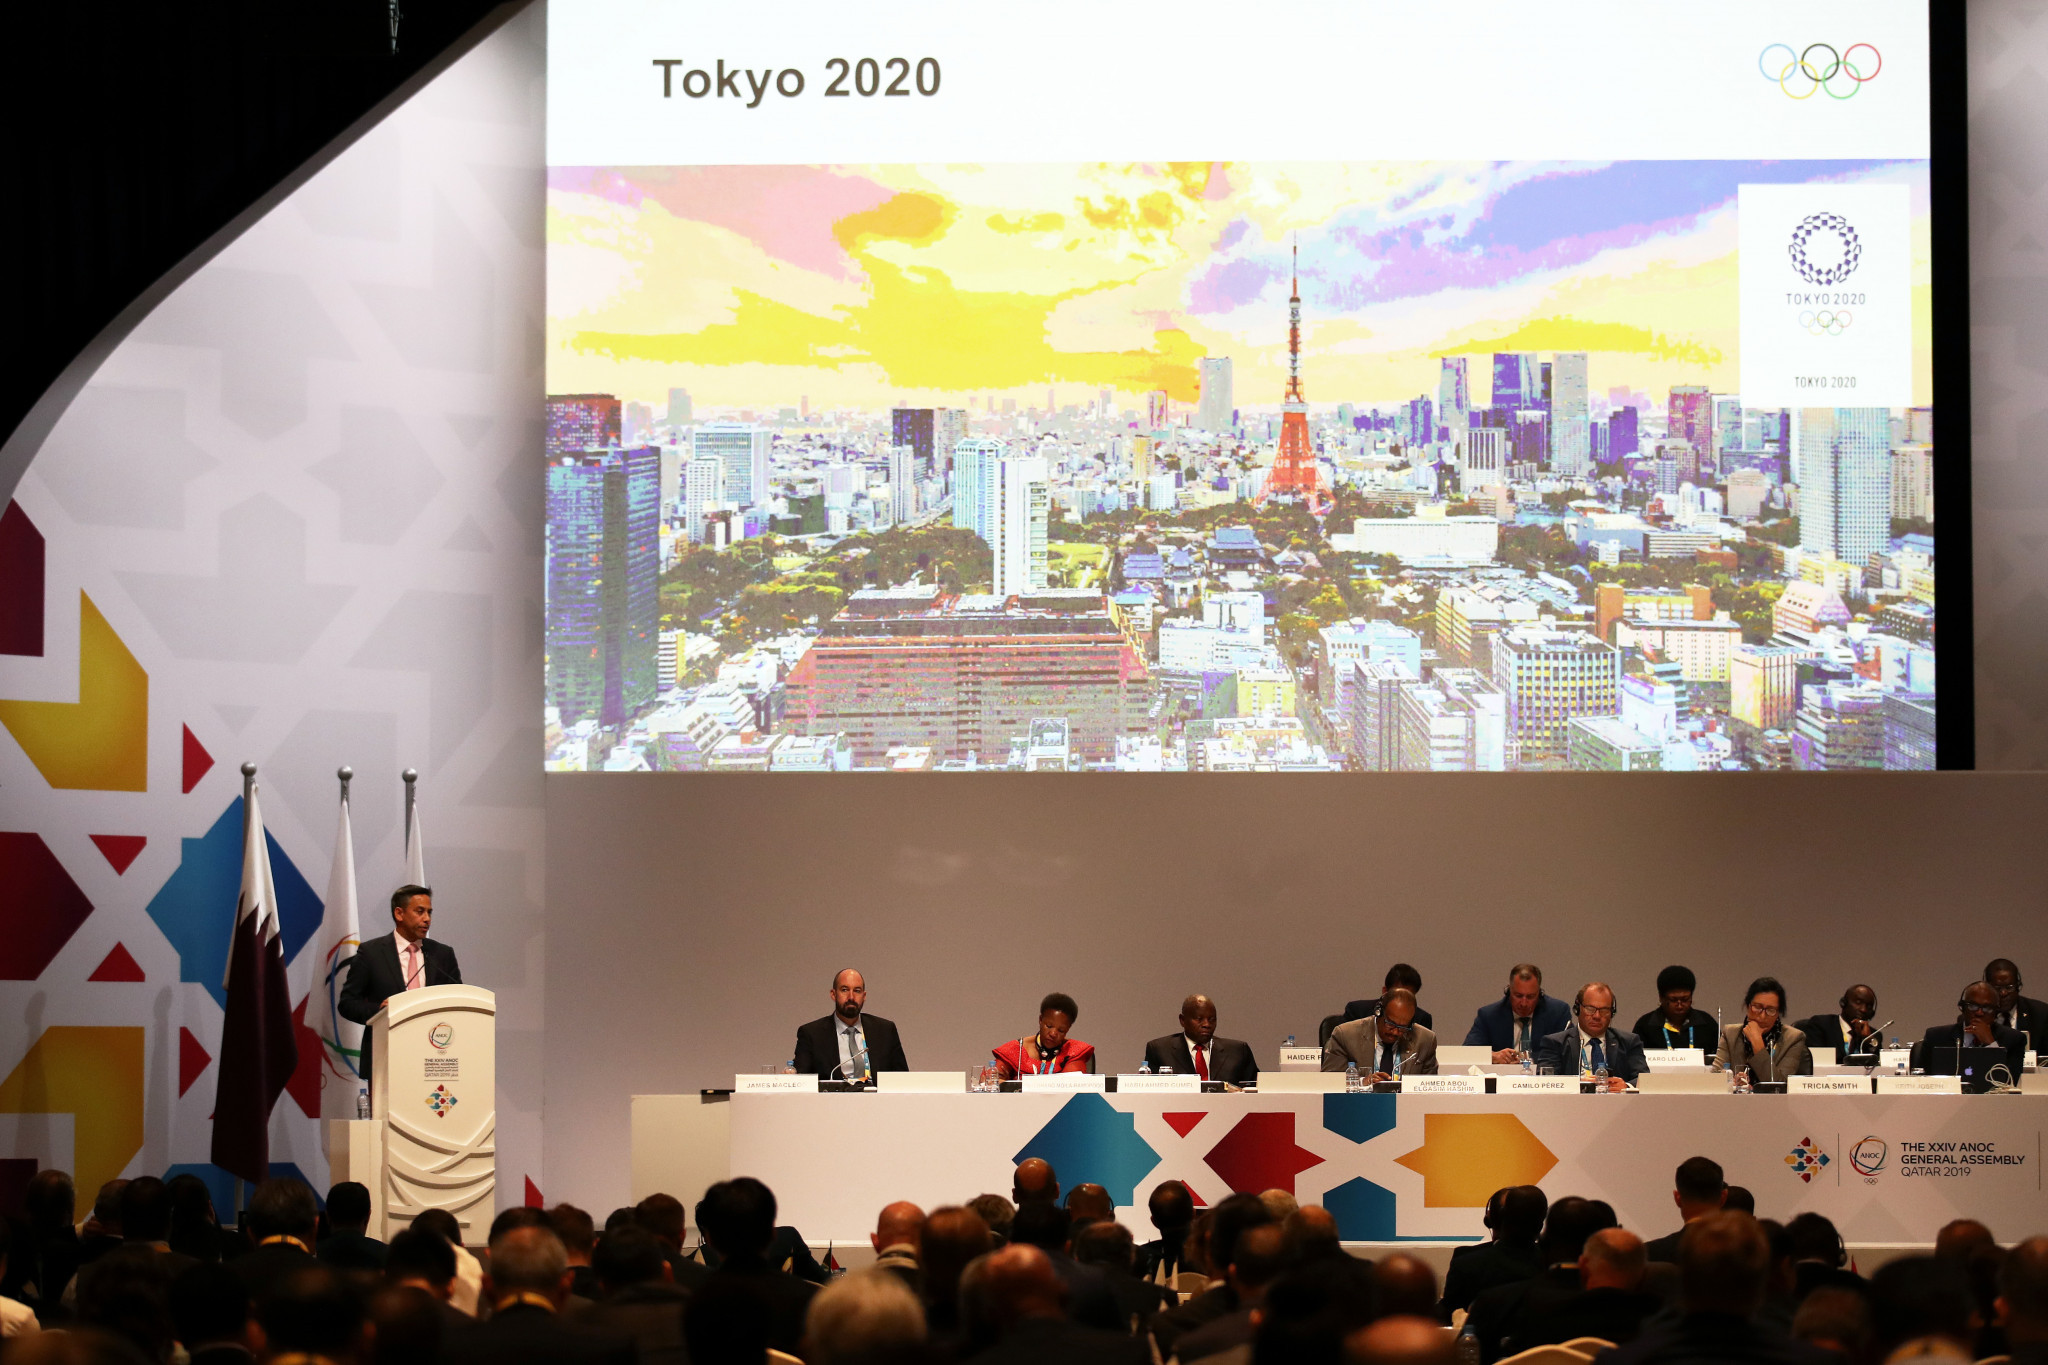 Delegates were updated on the Tokyo 2020 Olympics ©Getty Images